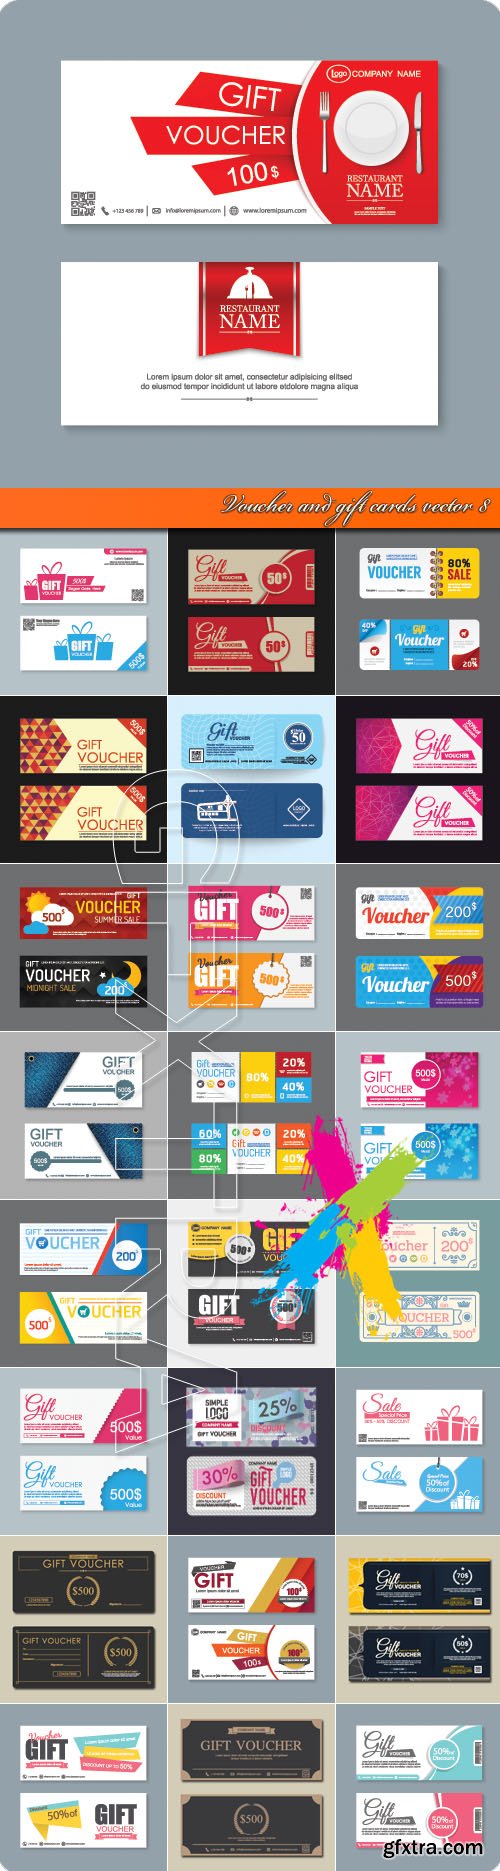 Voucher and gift cards vector 8